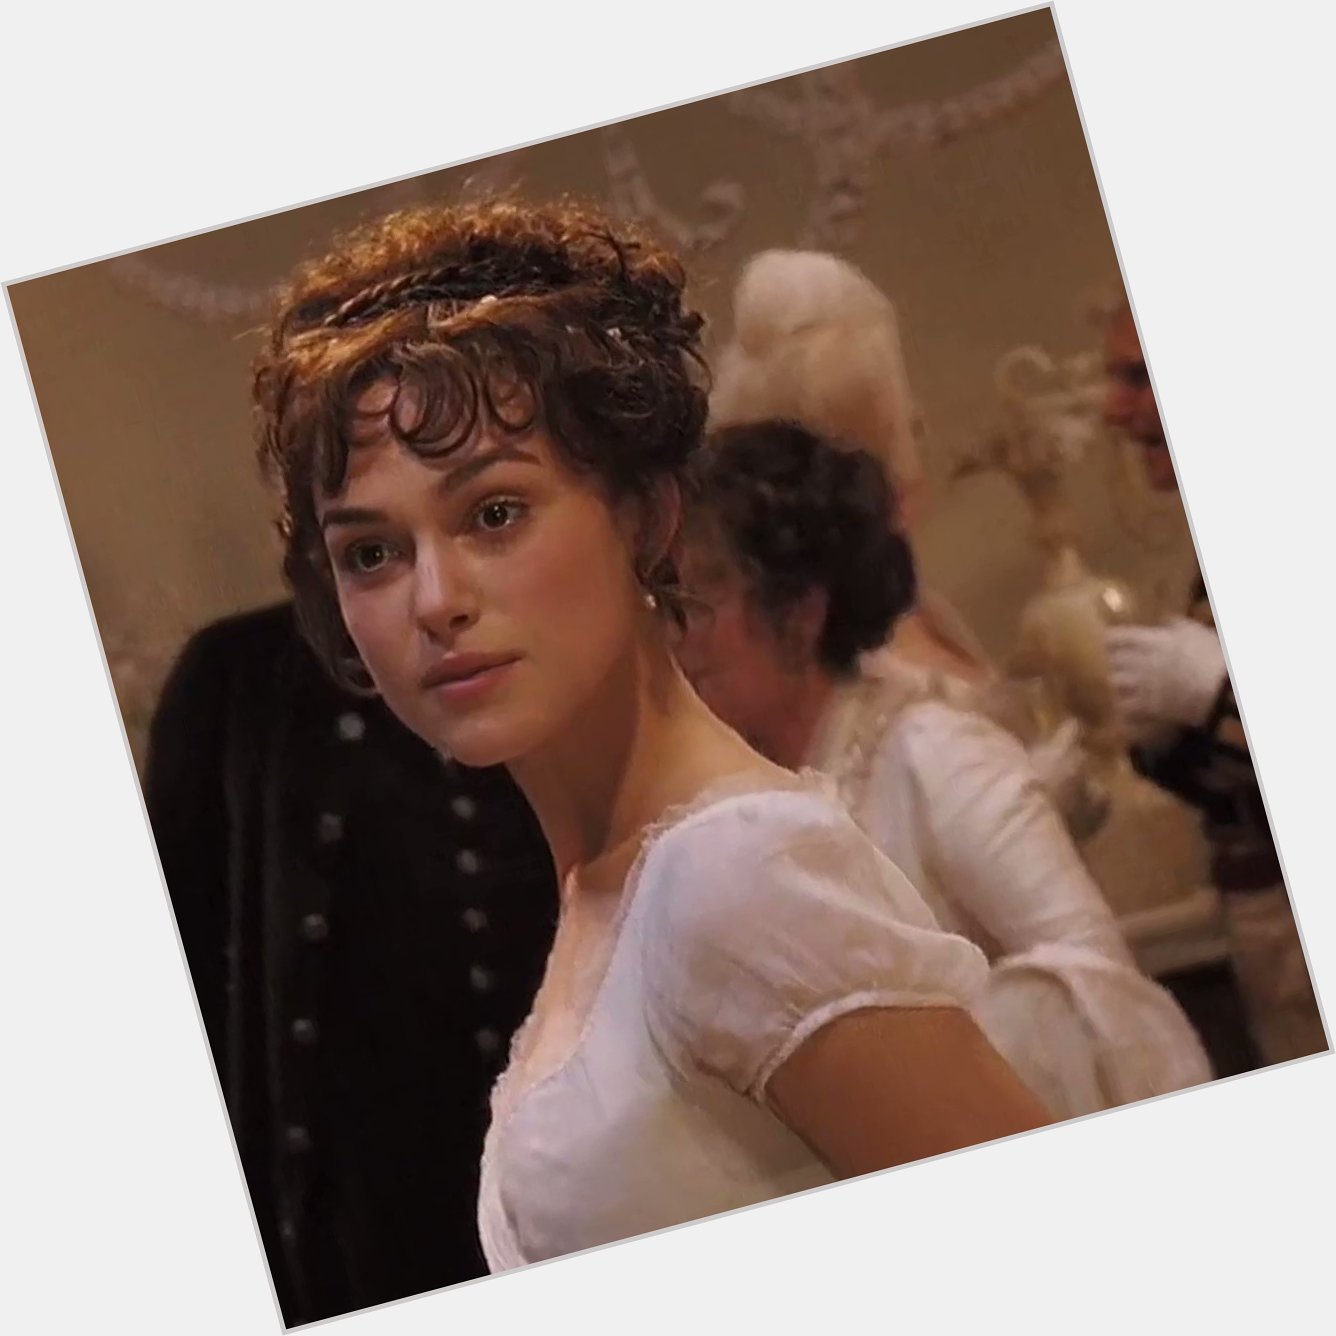 Happy birthday to the queen of period dramas !! i love u keira knightley <3

